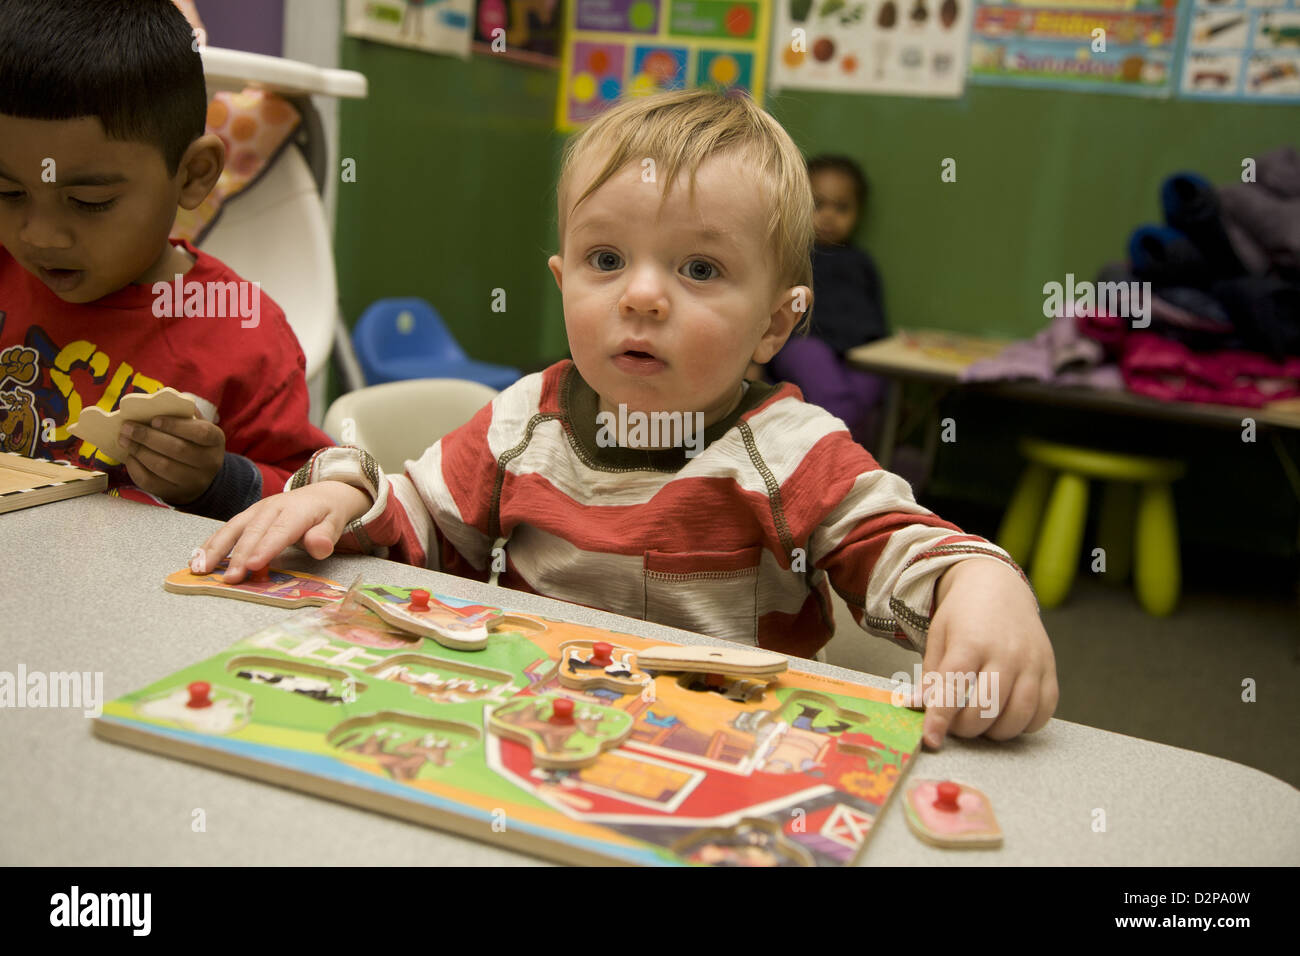 Kids Are Us Nursery school/early learning center in the highly multicultural Kensington neighborhood of Brooklyn, NY Stock Photo